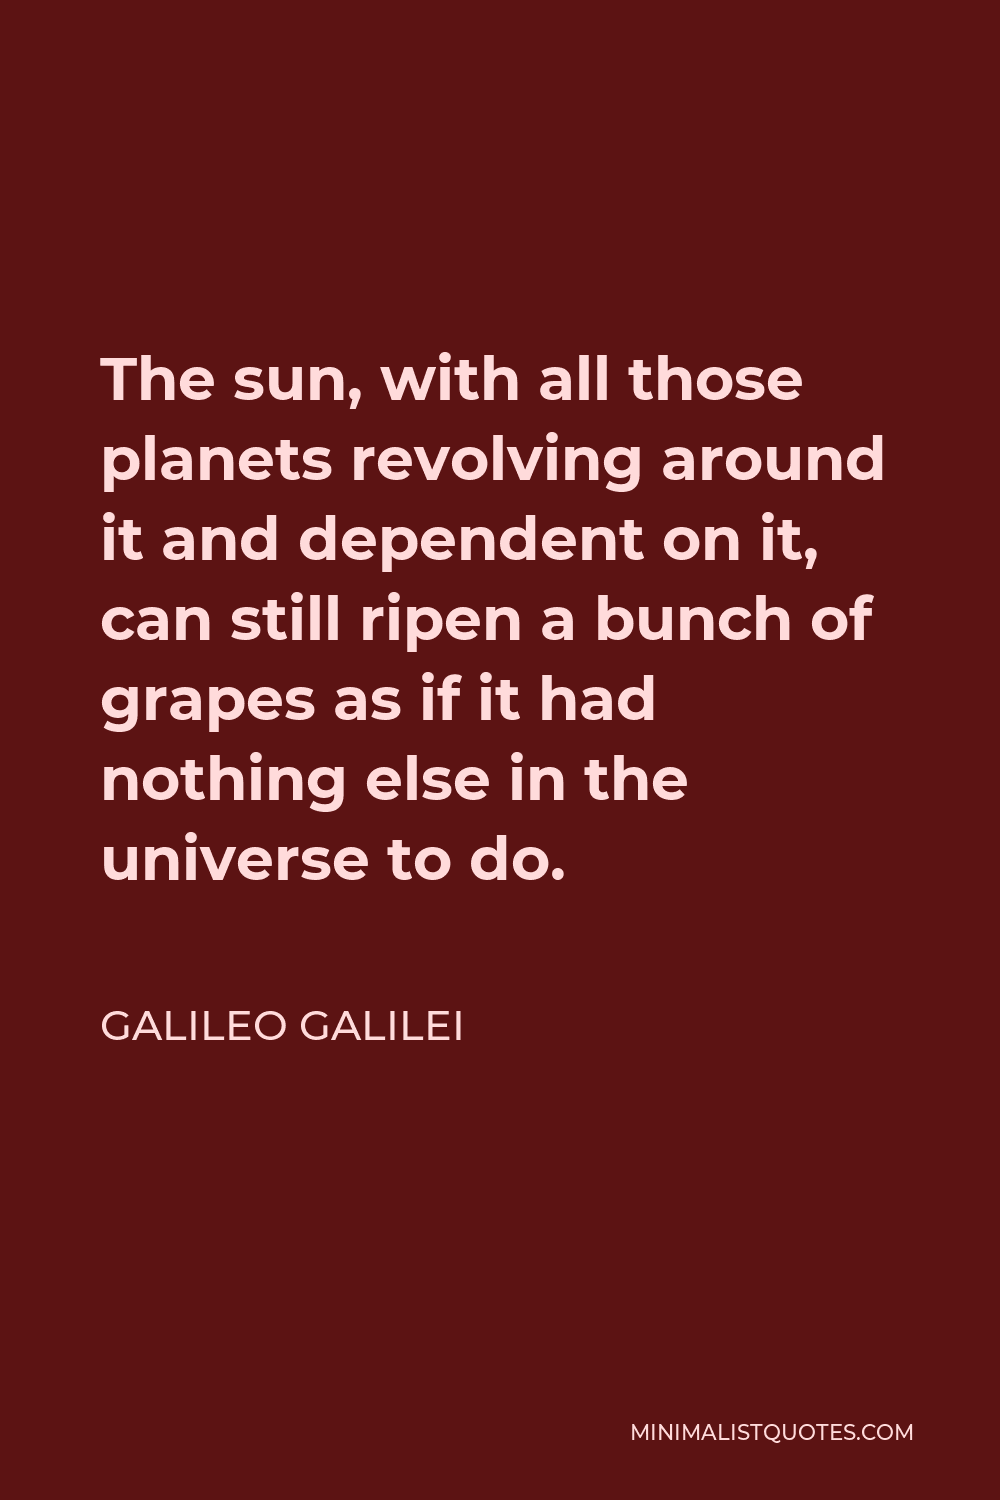 Galileo Galilei Quote - The sun, with all those planets revolving around it and dependent on it, can still ripen a bunch of grapes as if it had nothing else in the universe to do.